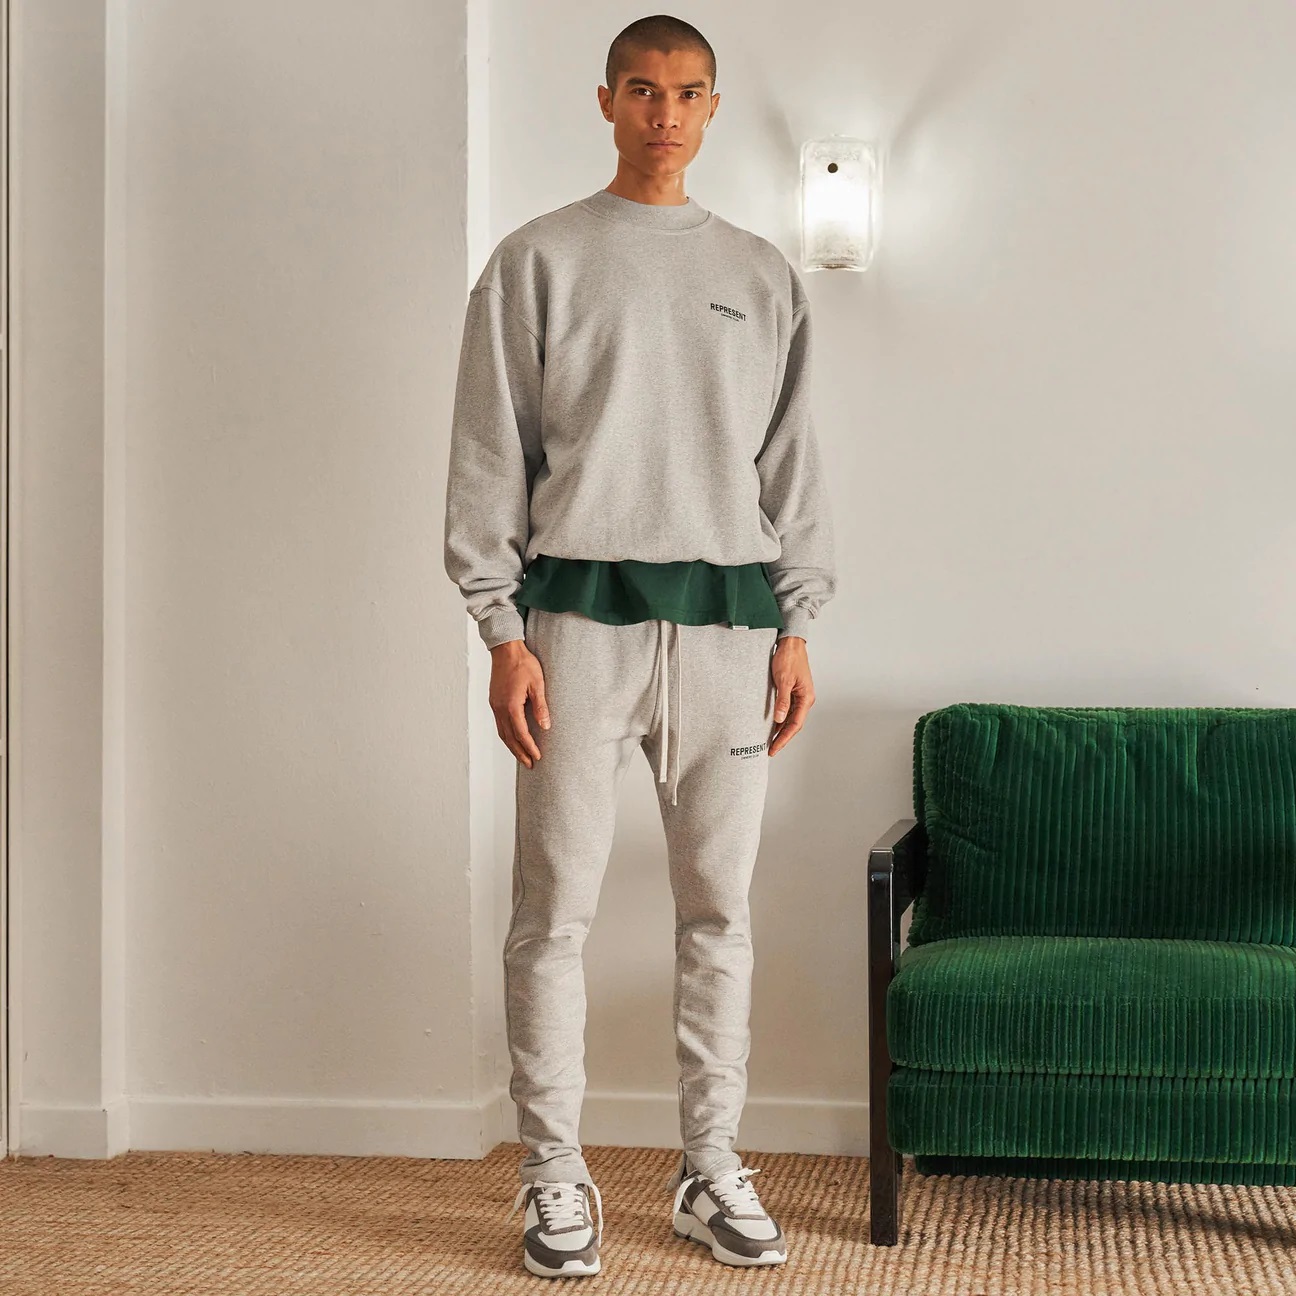 Represent Owners Club Sweater in Light Grey Melange L